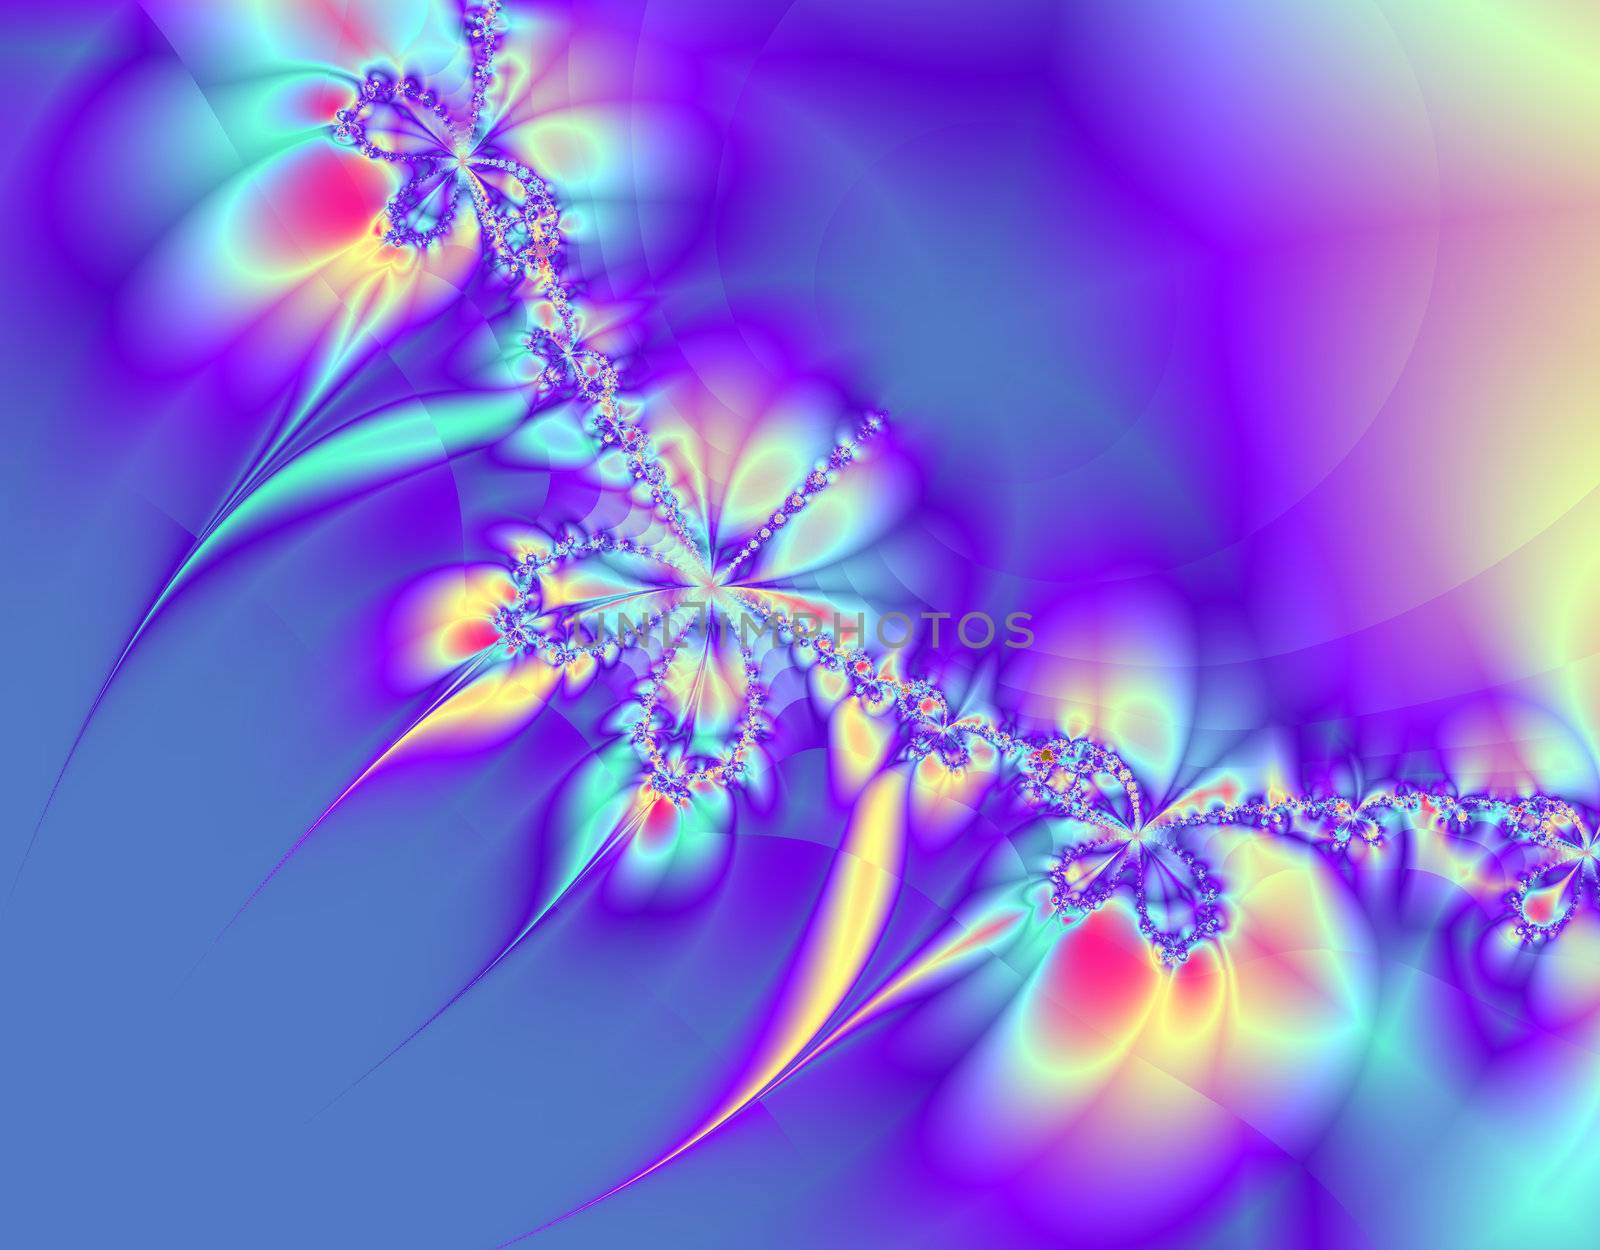 Abstract fractal image in colorful blues and purples, in a chain or string.